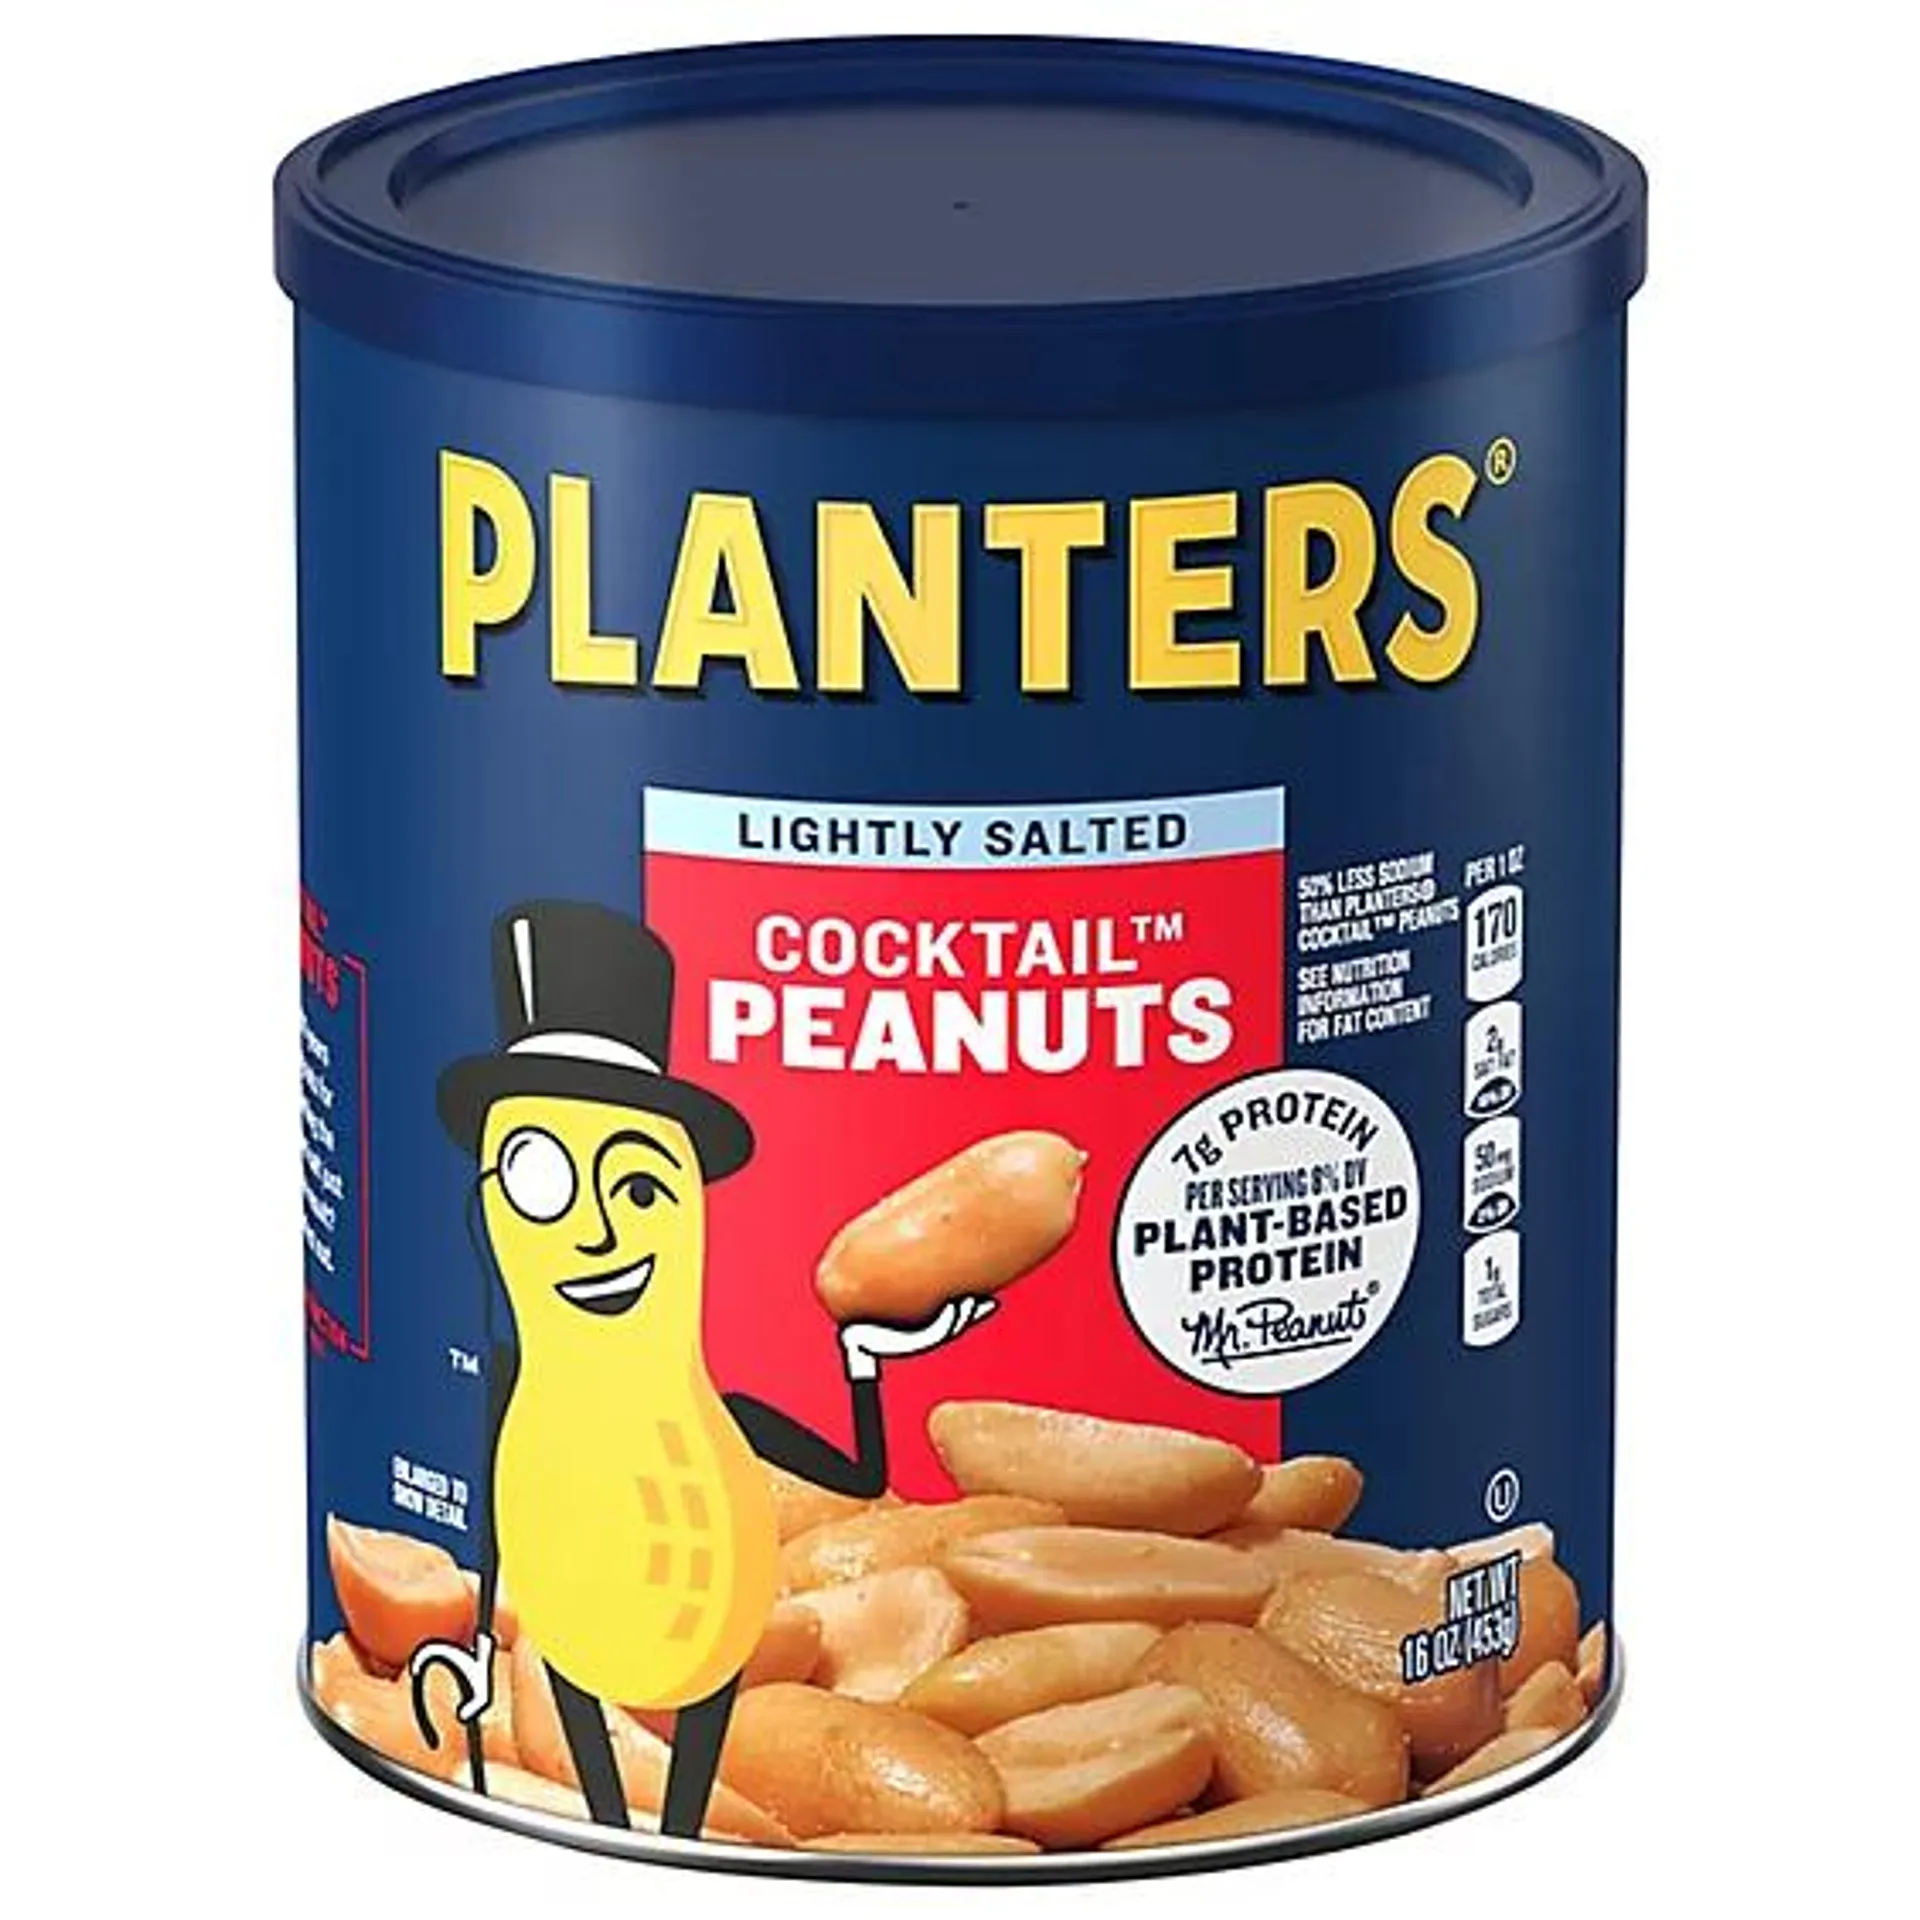 Planters Peanuts Cocktail Lightly Salted - 16 Oz